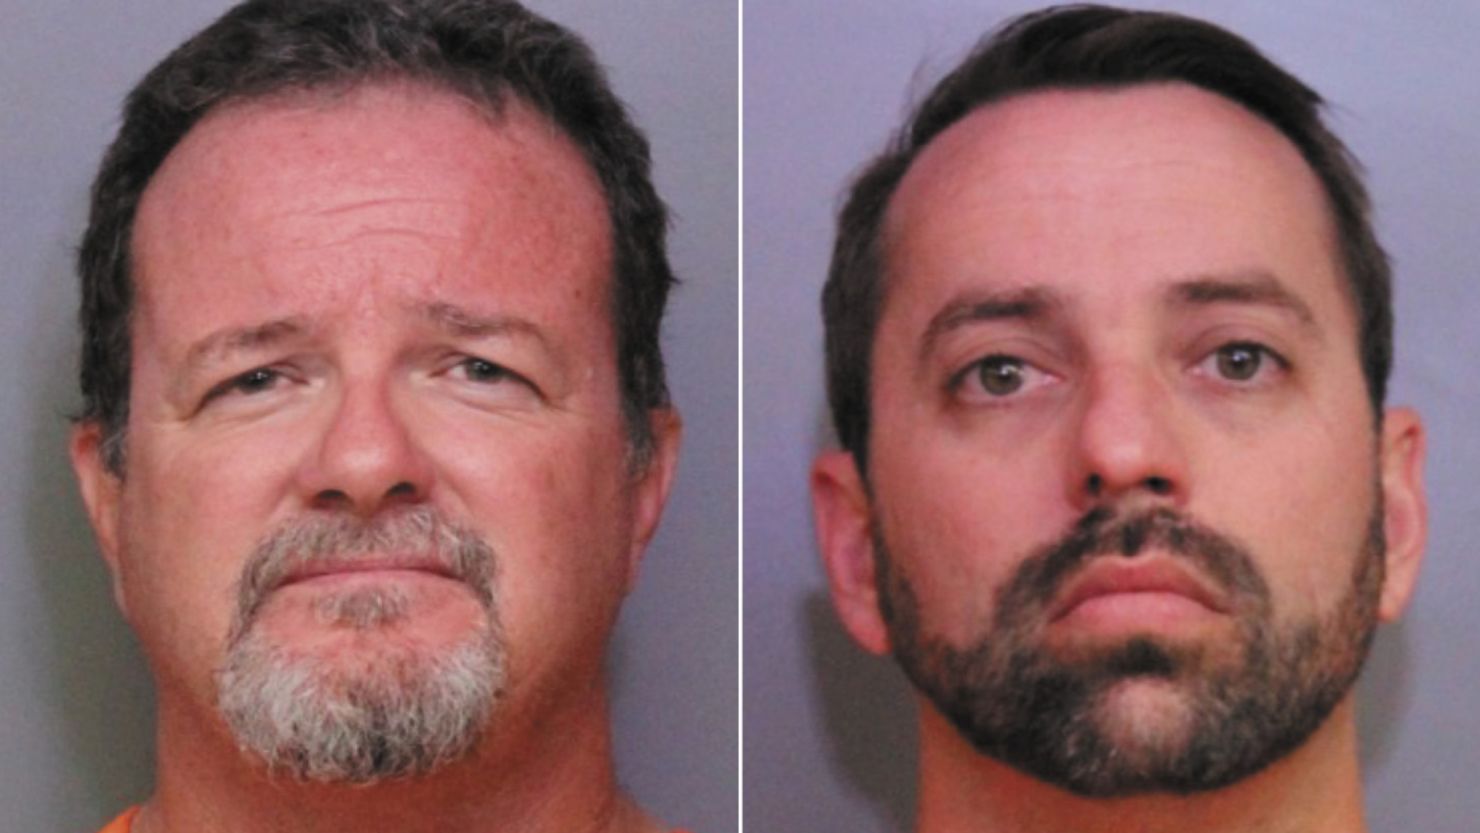 Two Disney employees, Donald Durr Jr. (left) and Brett Kinney (right) are among 17 people arrested in a child porn sting in Polk County, Florida, according to a press release from the Polk County Sheriff's Office.